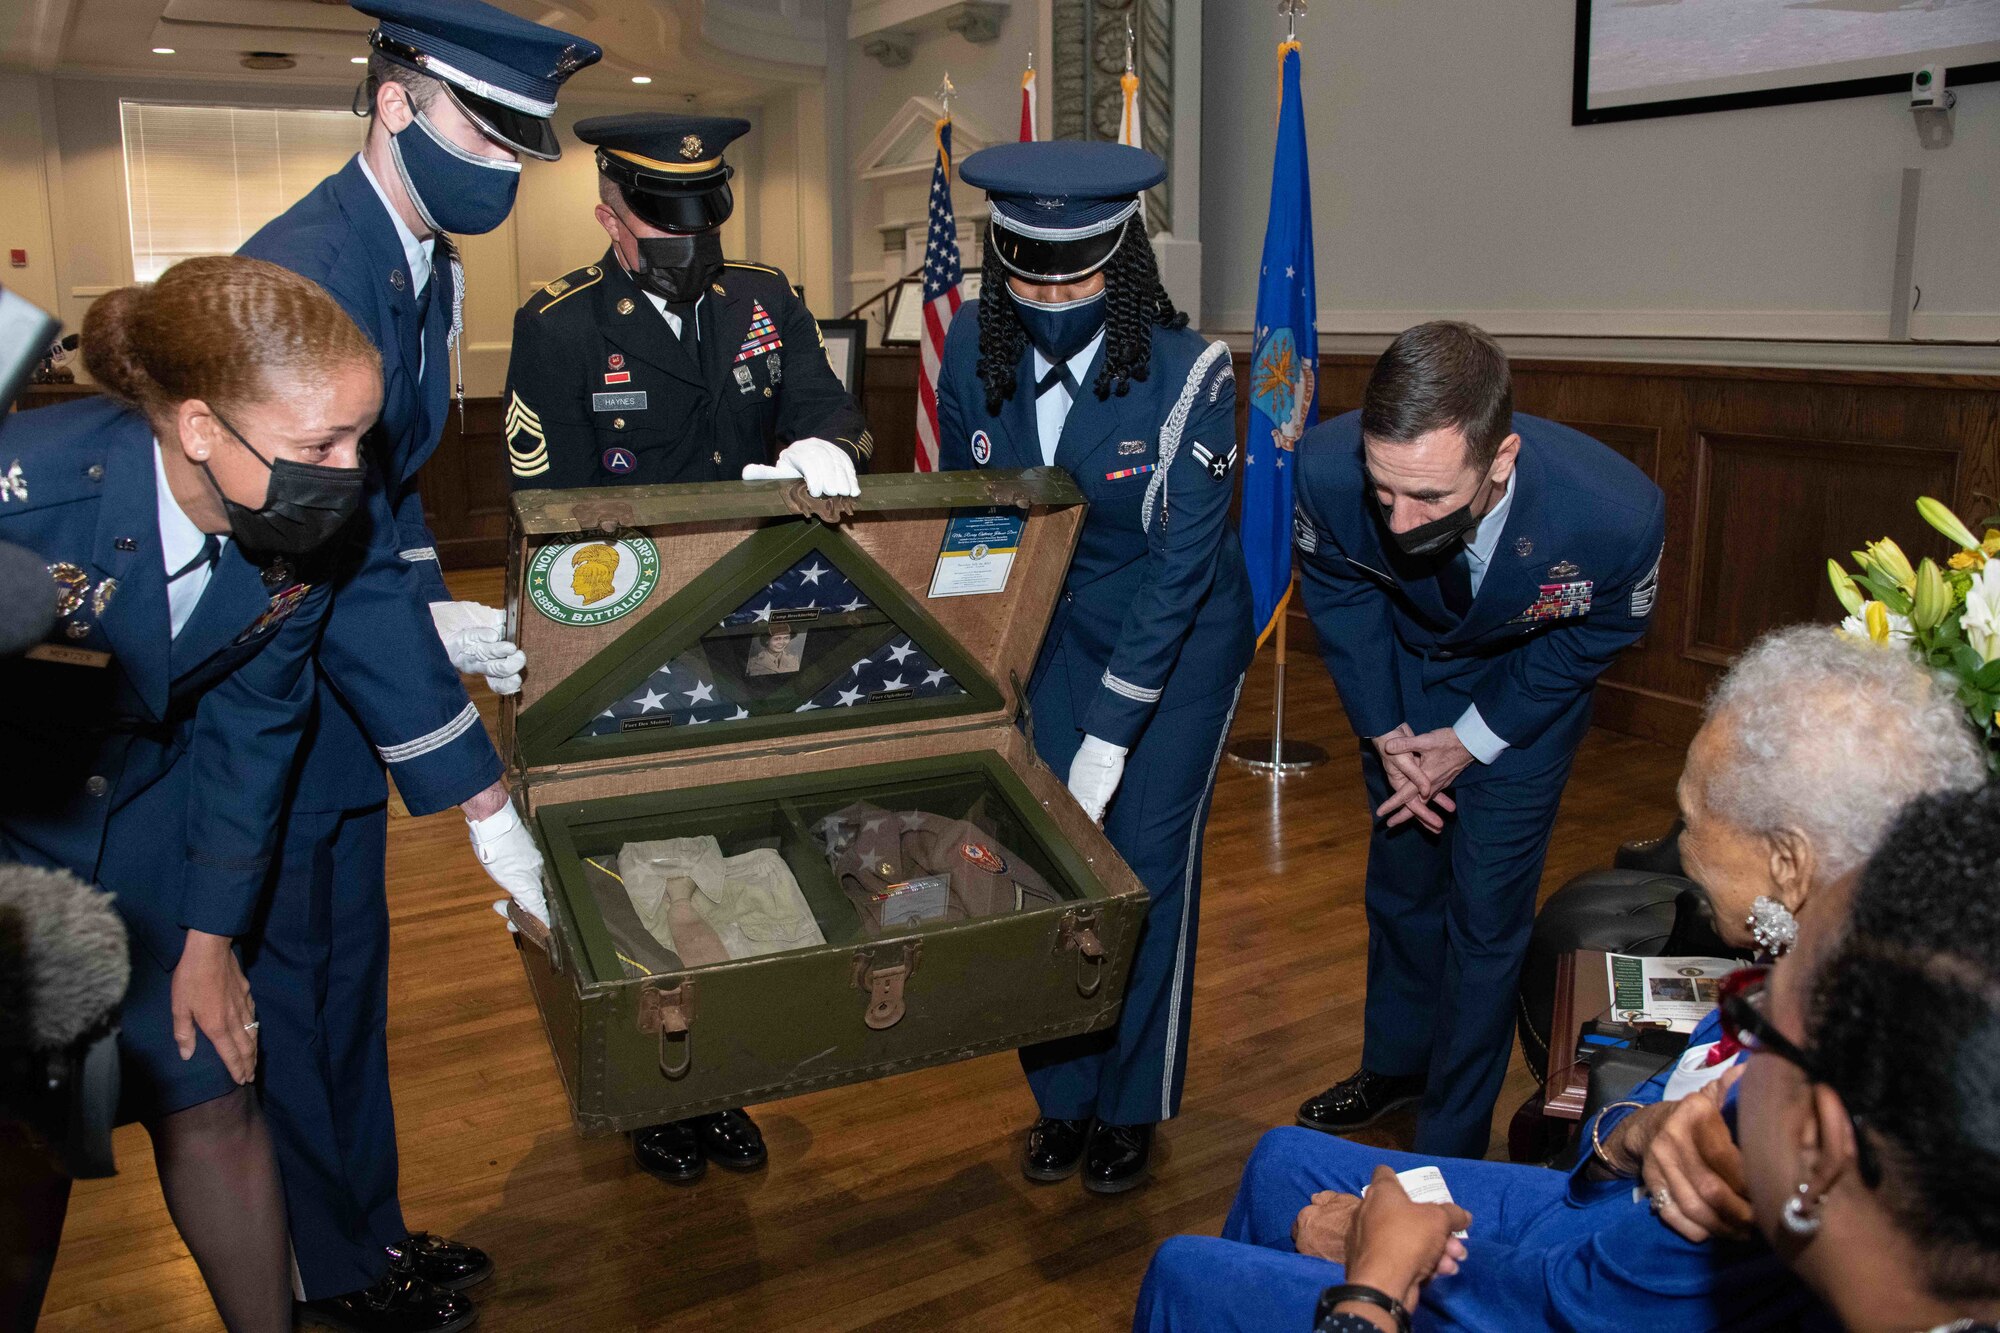 Mrs. Davis’s shadowbox is housed in an authentic World War II trunk. This trunk holds a uniform pieced together by Americans across the country after hearing Mrs. Davis’s story. Complete with a replica of Mrs. Davis’s medals and an original World War II Women’s Army Corps Patch. The flags encased were flown at each base Mrs. Davis served, including Fort Oglethorp, GA, Camp Breckinridge, KY, and Fort Des Moines, IA.